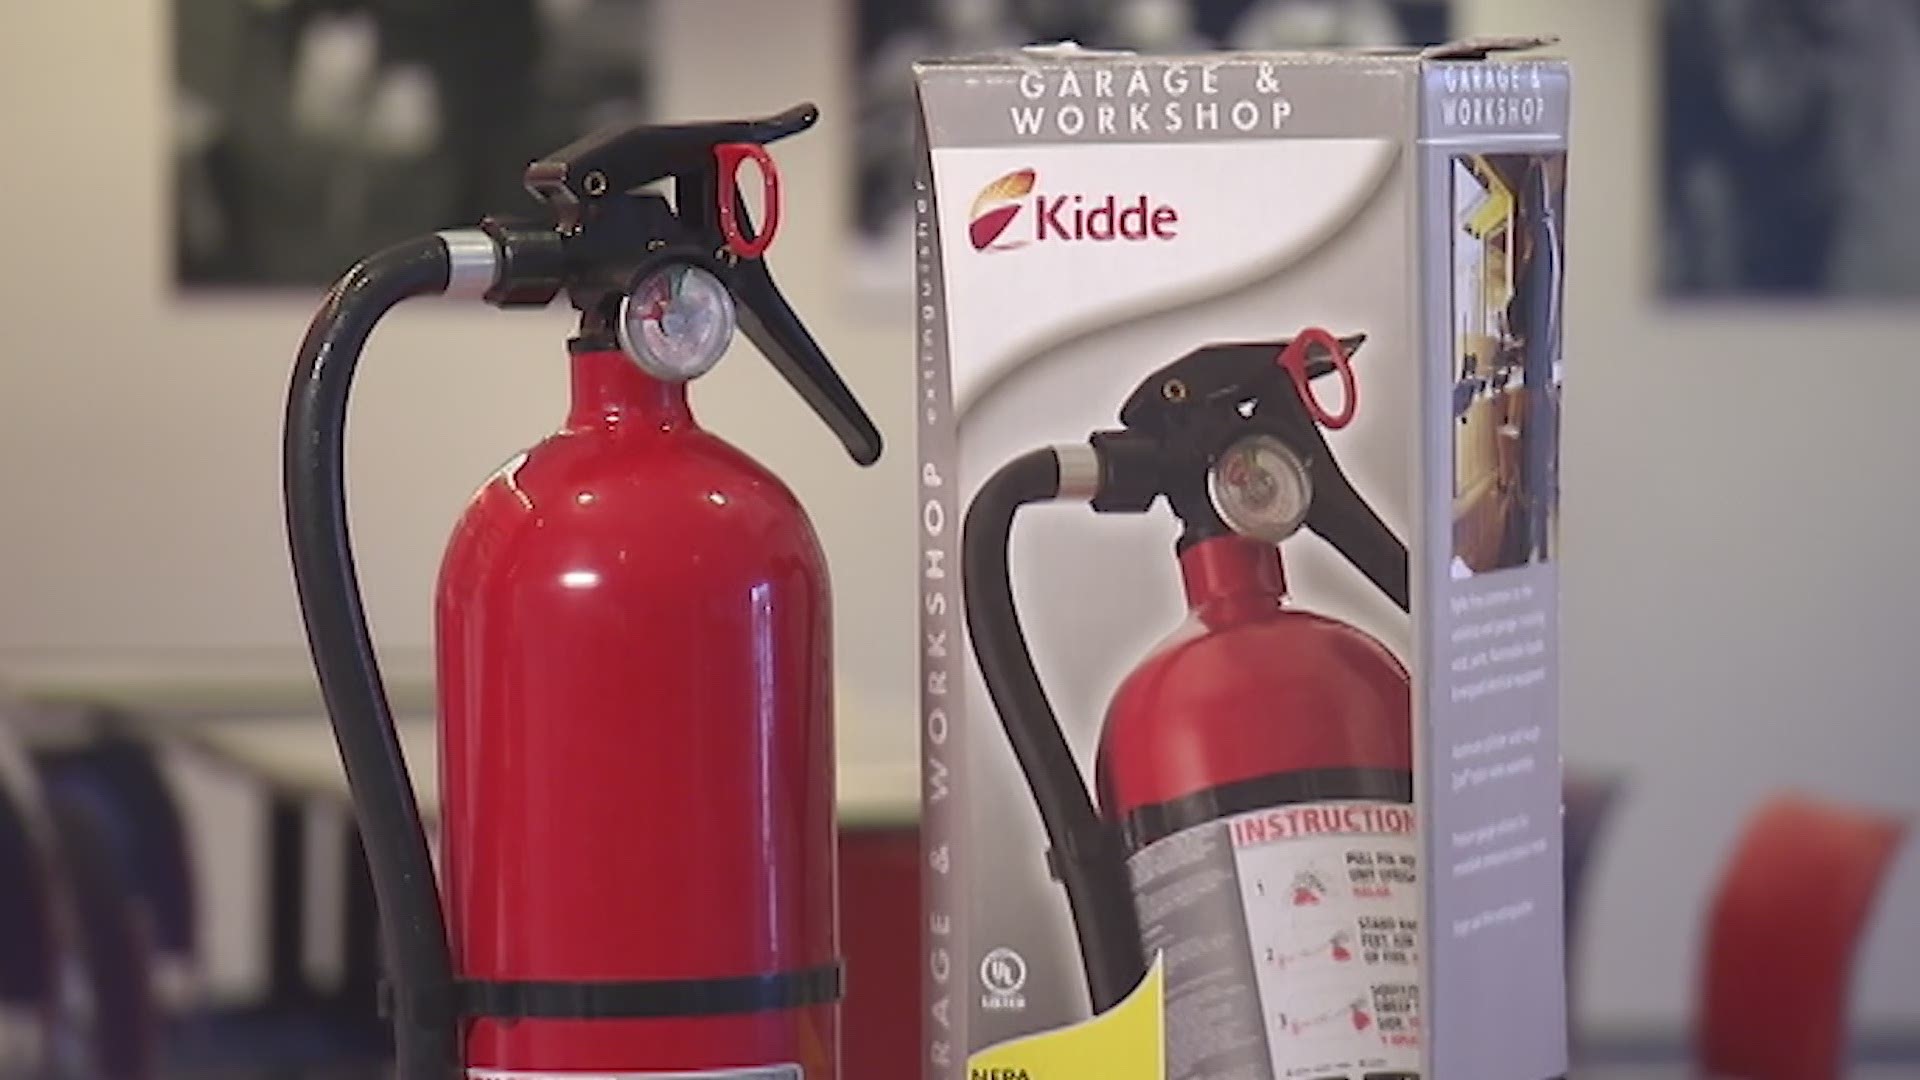 A Consumer Reports investigation reveals new findings about how Kidde allegedly failed to report information about problems with its fire extinguishers